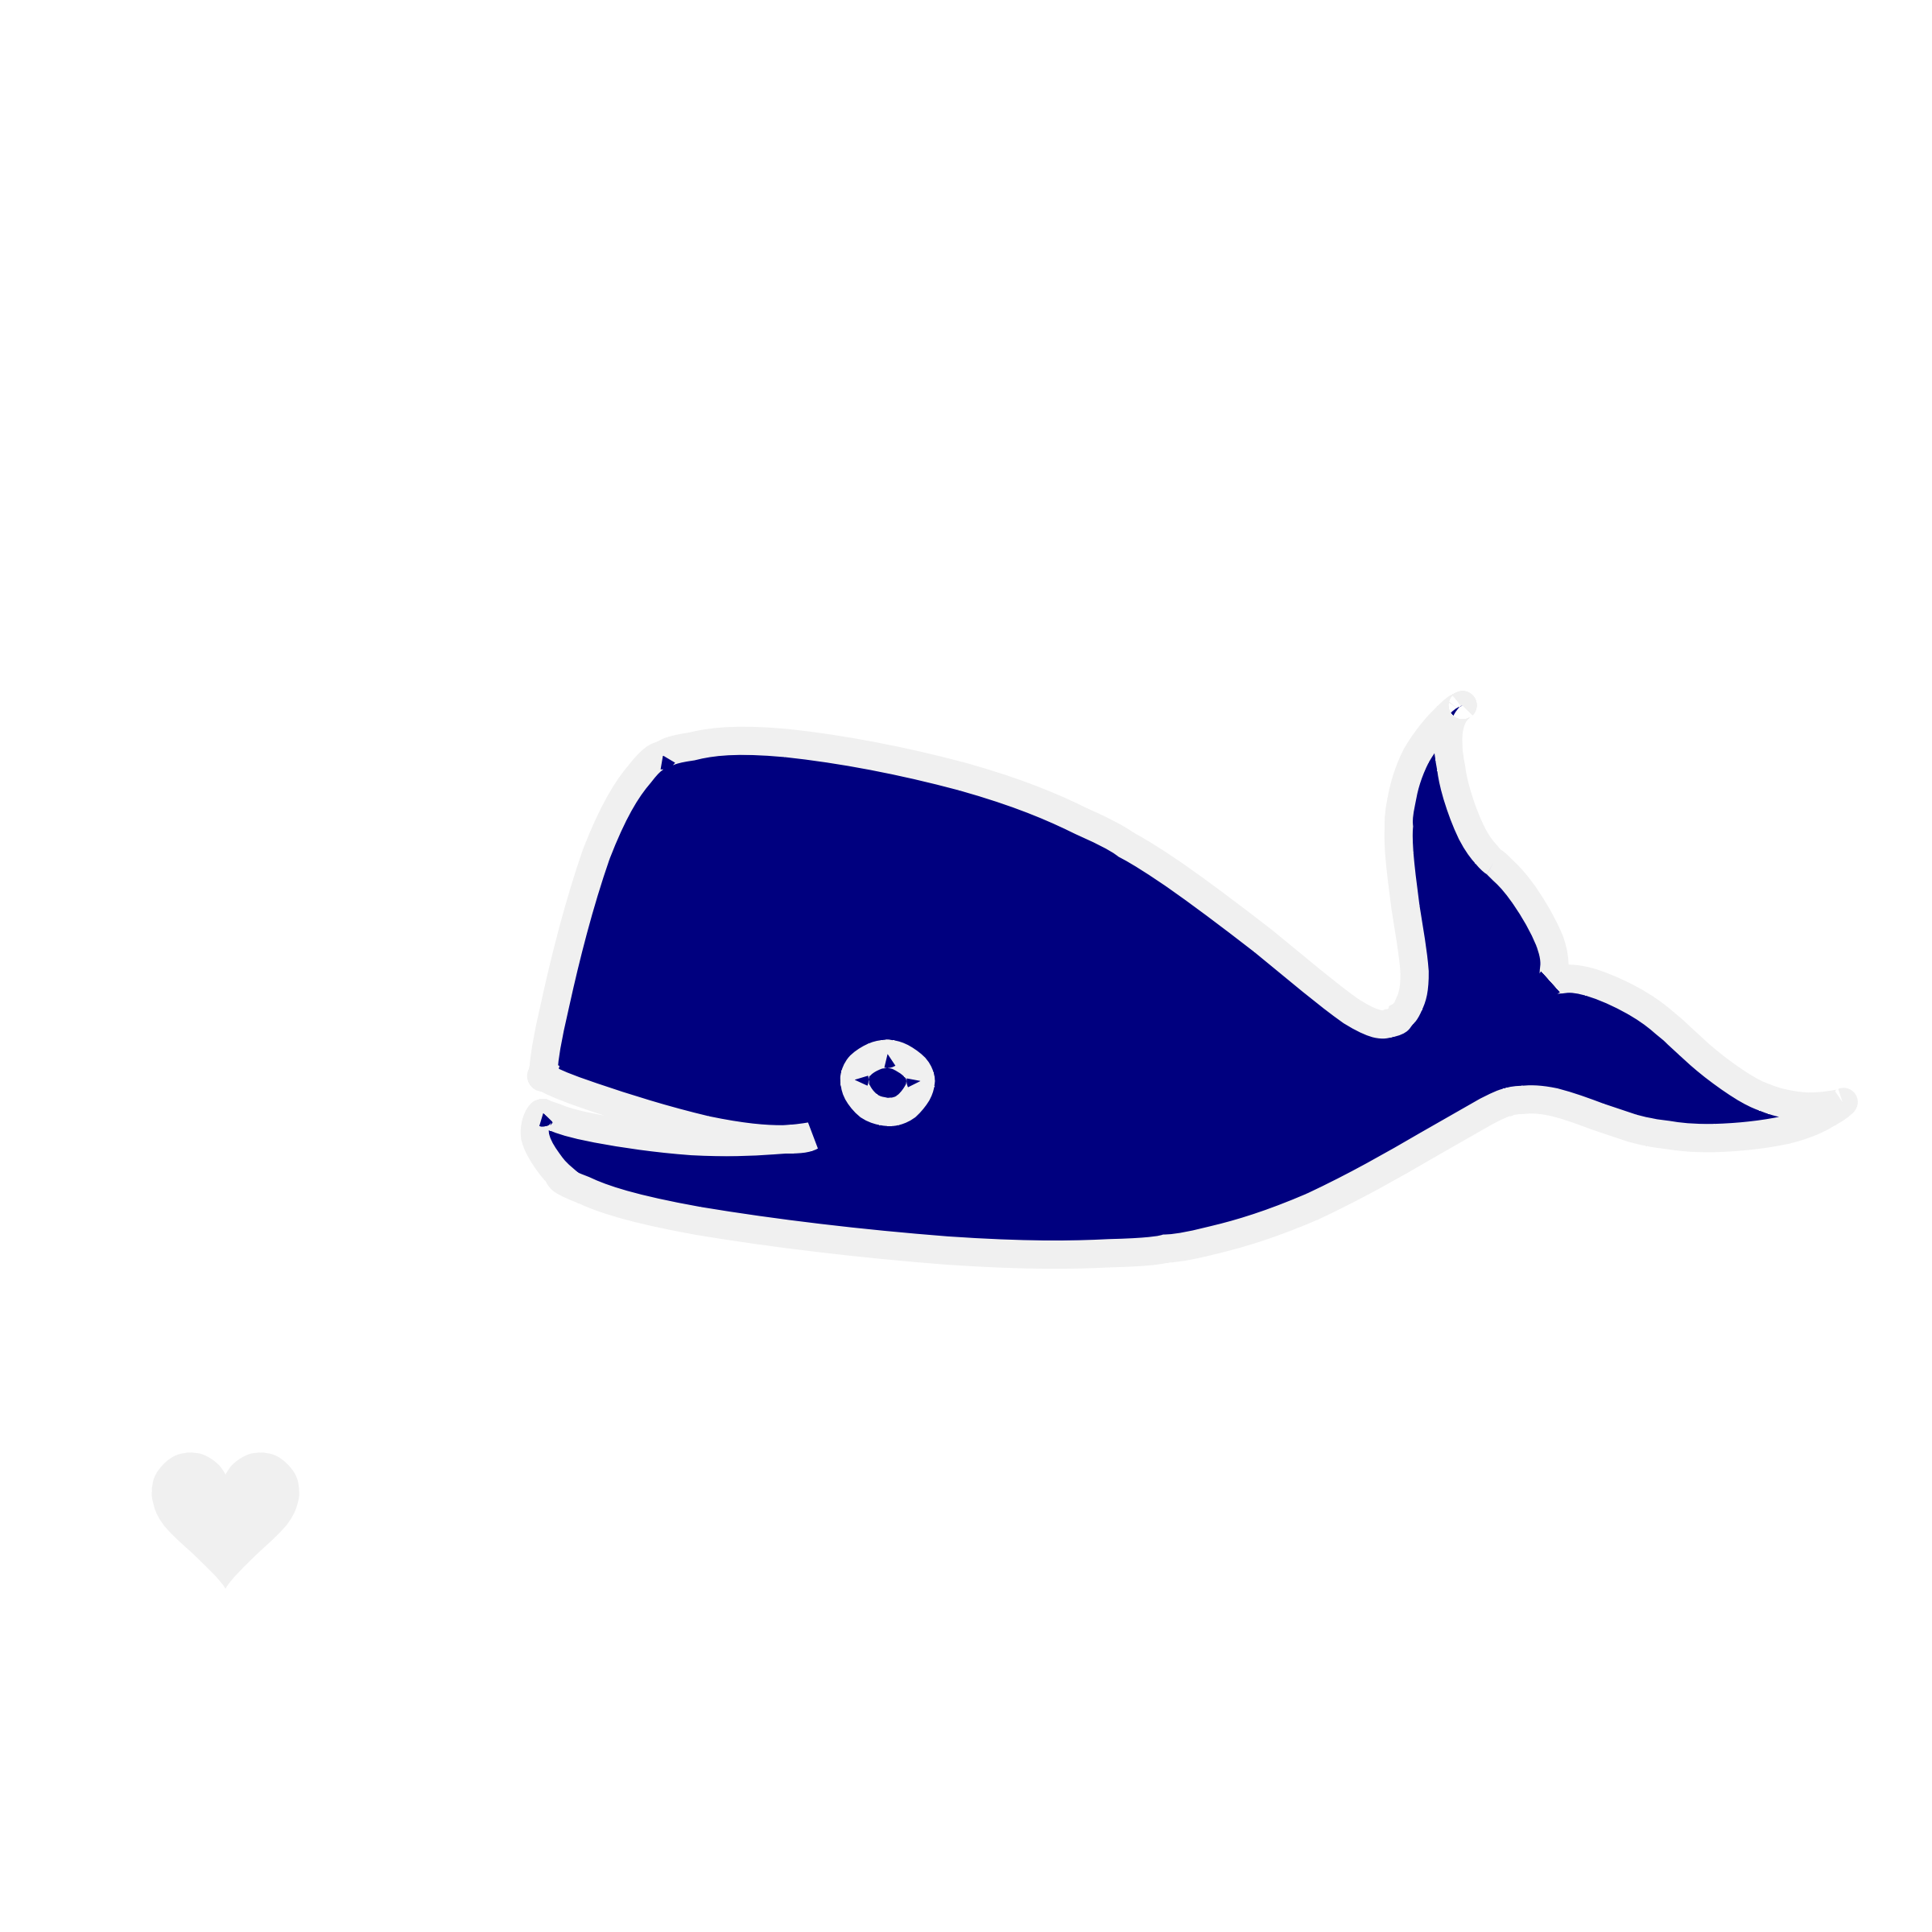 free animated whale clipart - photo #49